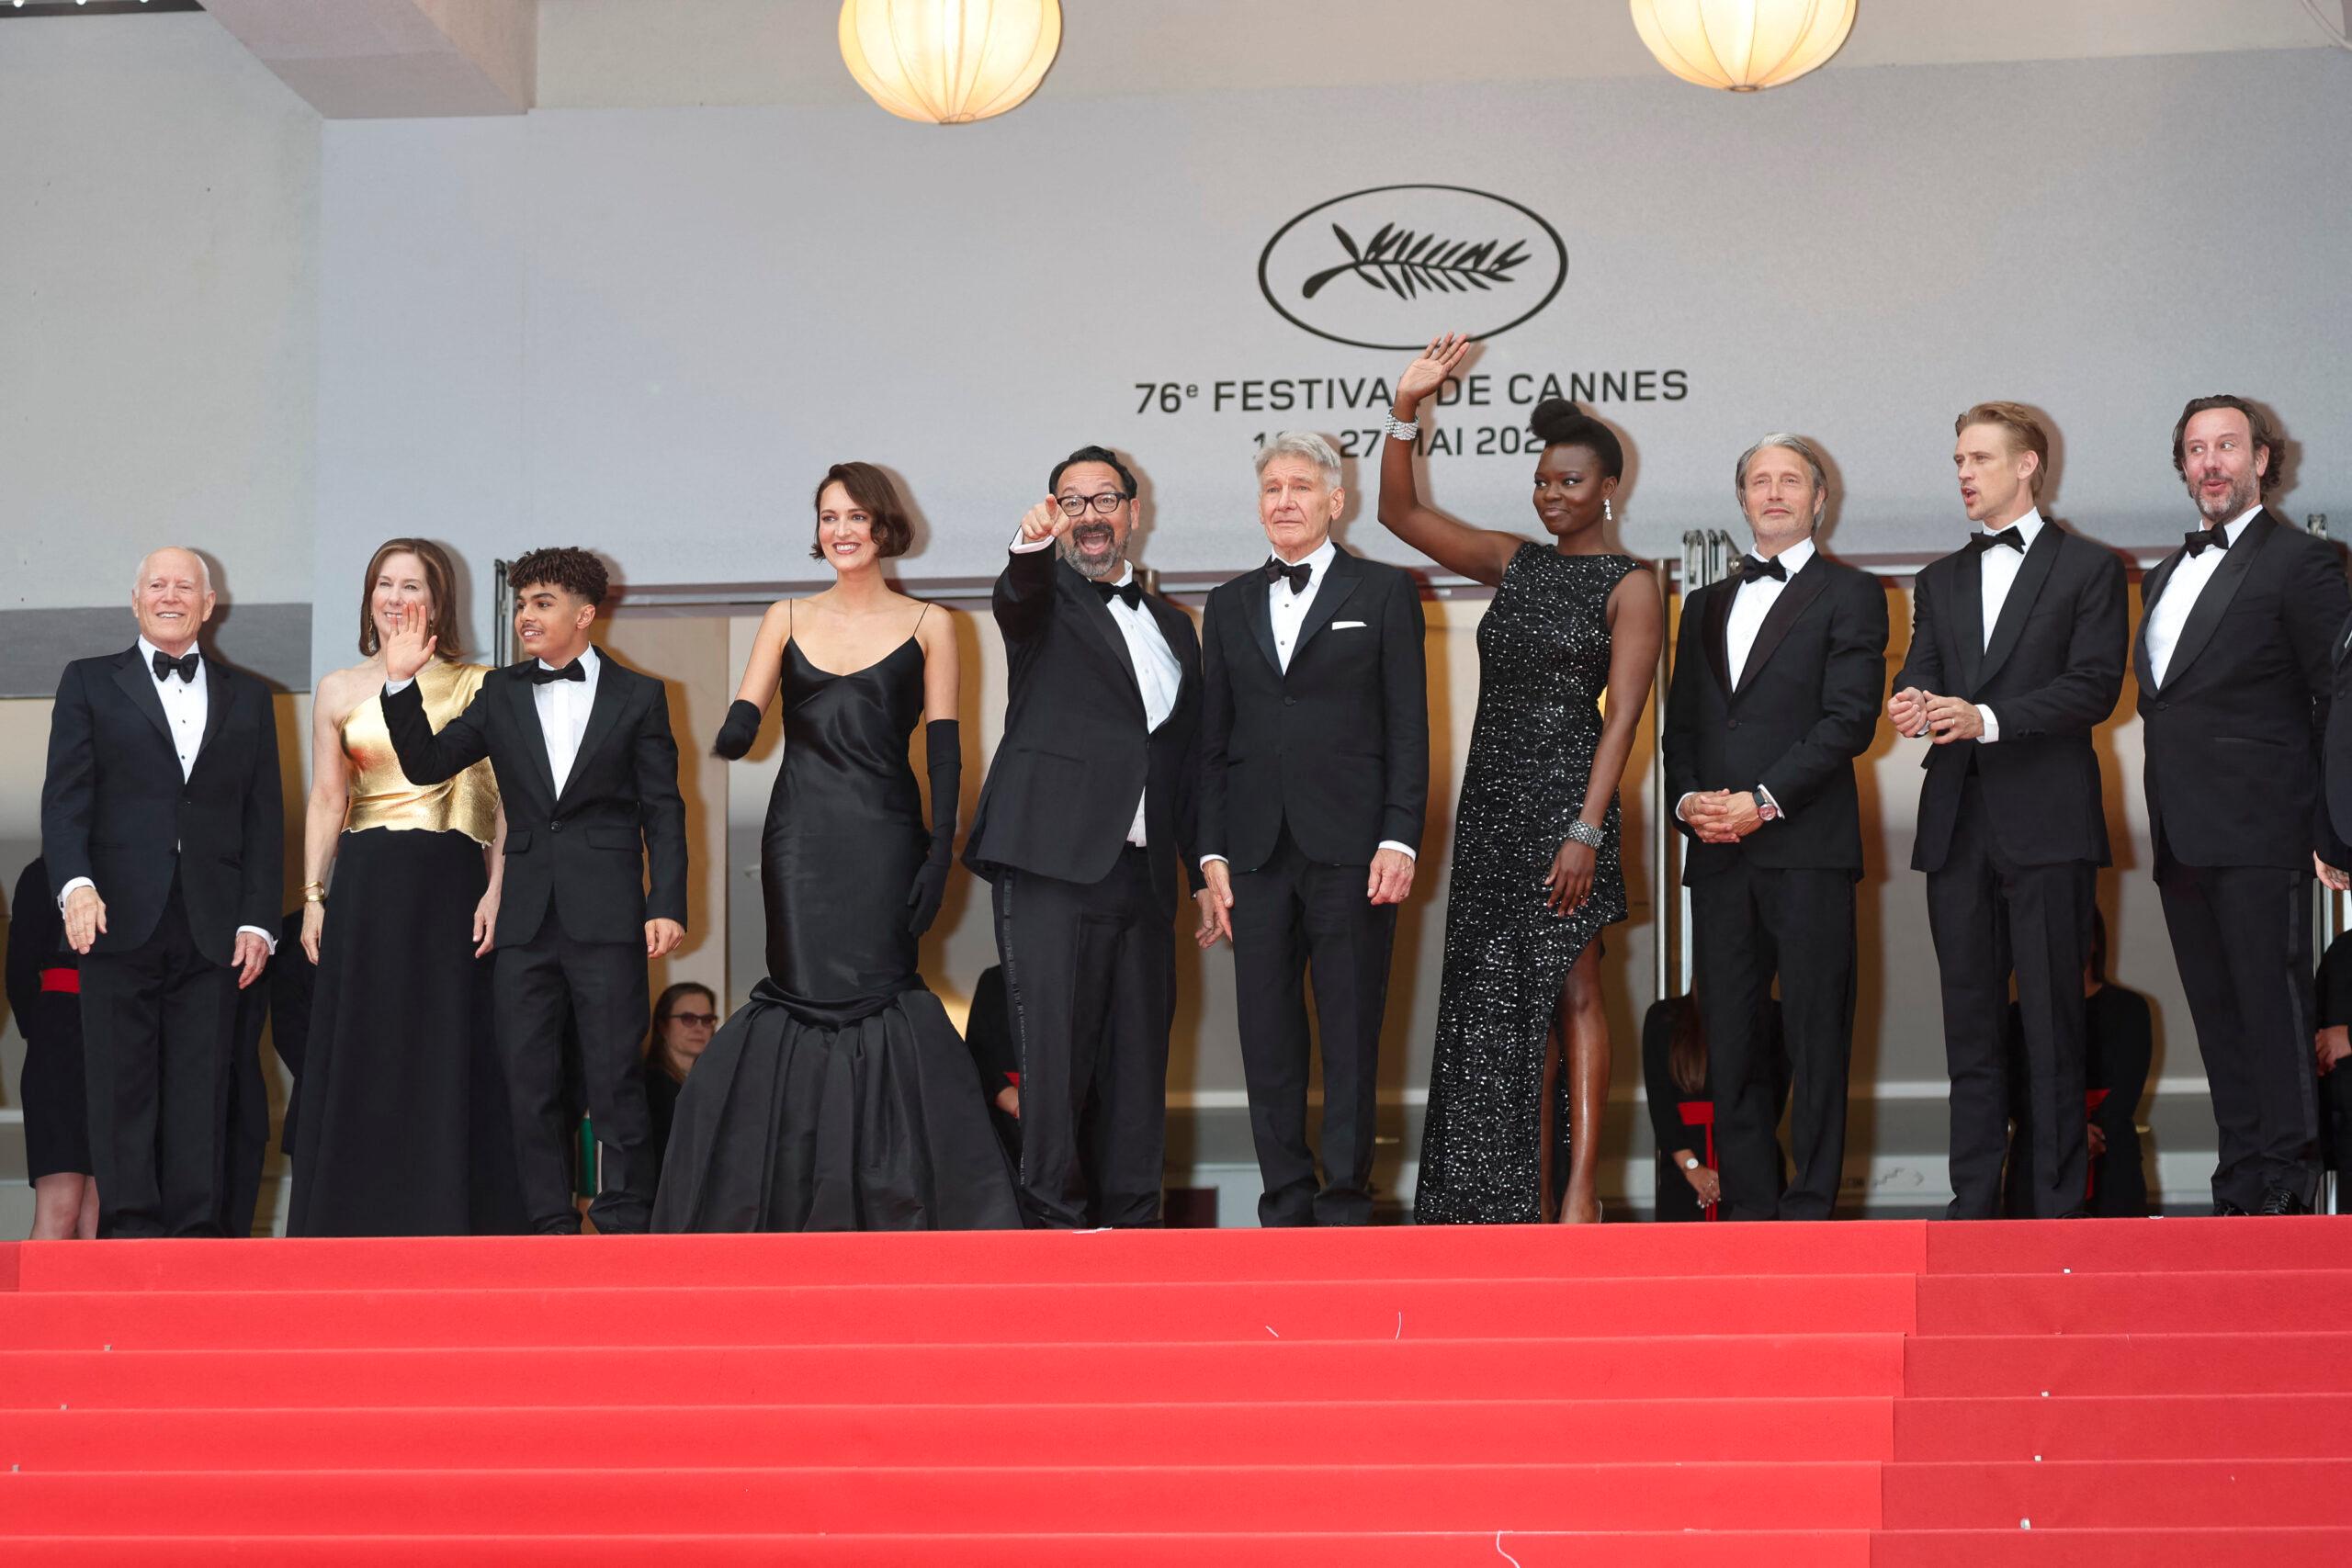 Victoria Bonya attends the 'Indiana Jones And The Dial Of Destiny' during the 76th Cannes Film Festival at Palais des Festivals in Cannes, France, on 18 May 2023. 18 May 2023 Pictured: Kathleen Kennedy, Ethann Isidore, Phoebe Waller-Bridge, James Mangold, Shaunette Renee Wilson, Boyd Holbrook, Mads Mikkelsen, Harrison Ford, Frank Marshall and Simon Emanuel attend the 'Indiana Jones And The Dial Of Destiny' during the 76th Cannes Film Festival at Palais des Festivals in Cannes, France, on 18 May 2023. Photo: Vinnie Levine. Photo credit: Vinnie Levine / MEGA TheMegaAgency.com +1 888 505 6342 (Mega Agency TagID: MEGA983487_029.jpg) [Photo via Mega Agency]